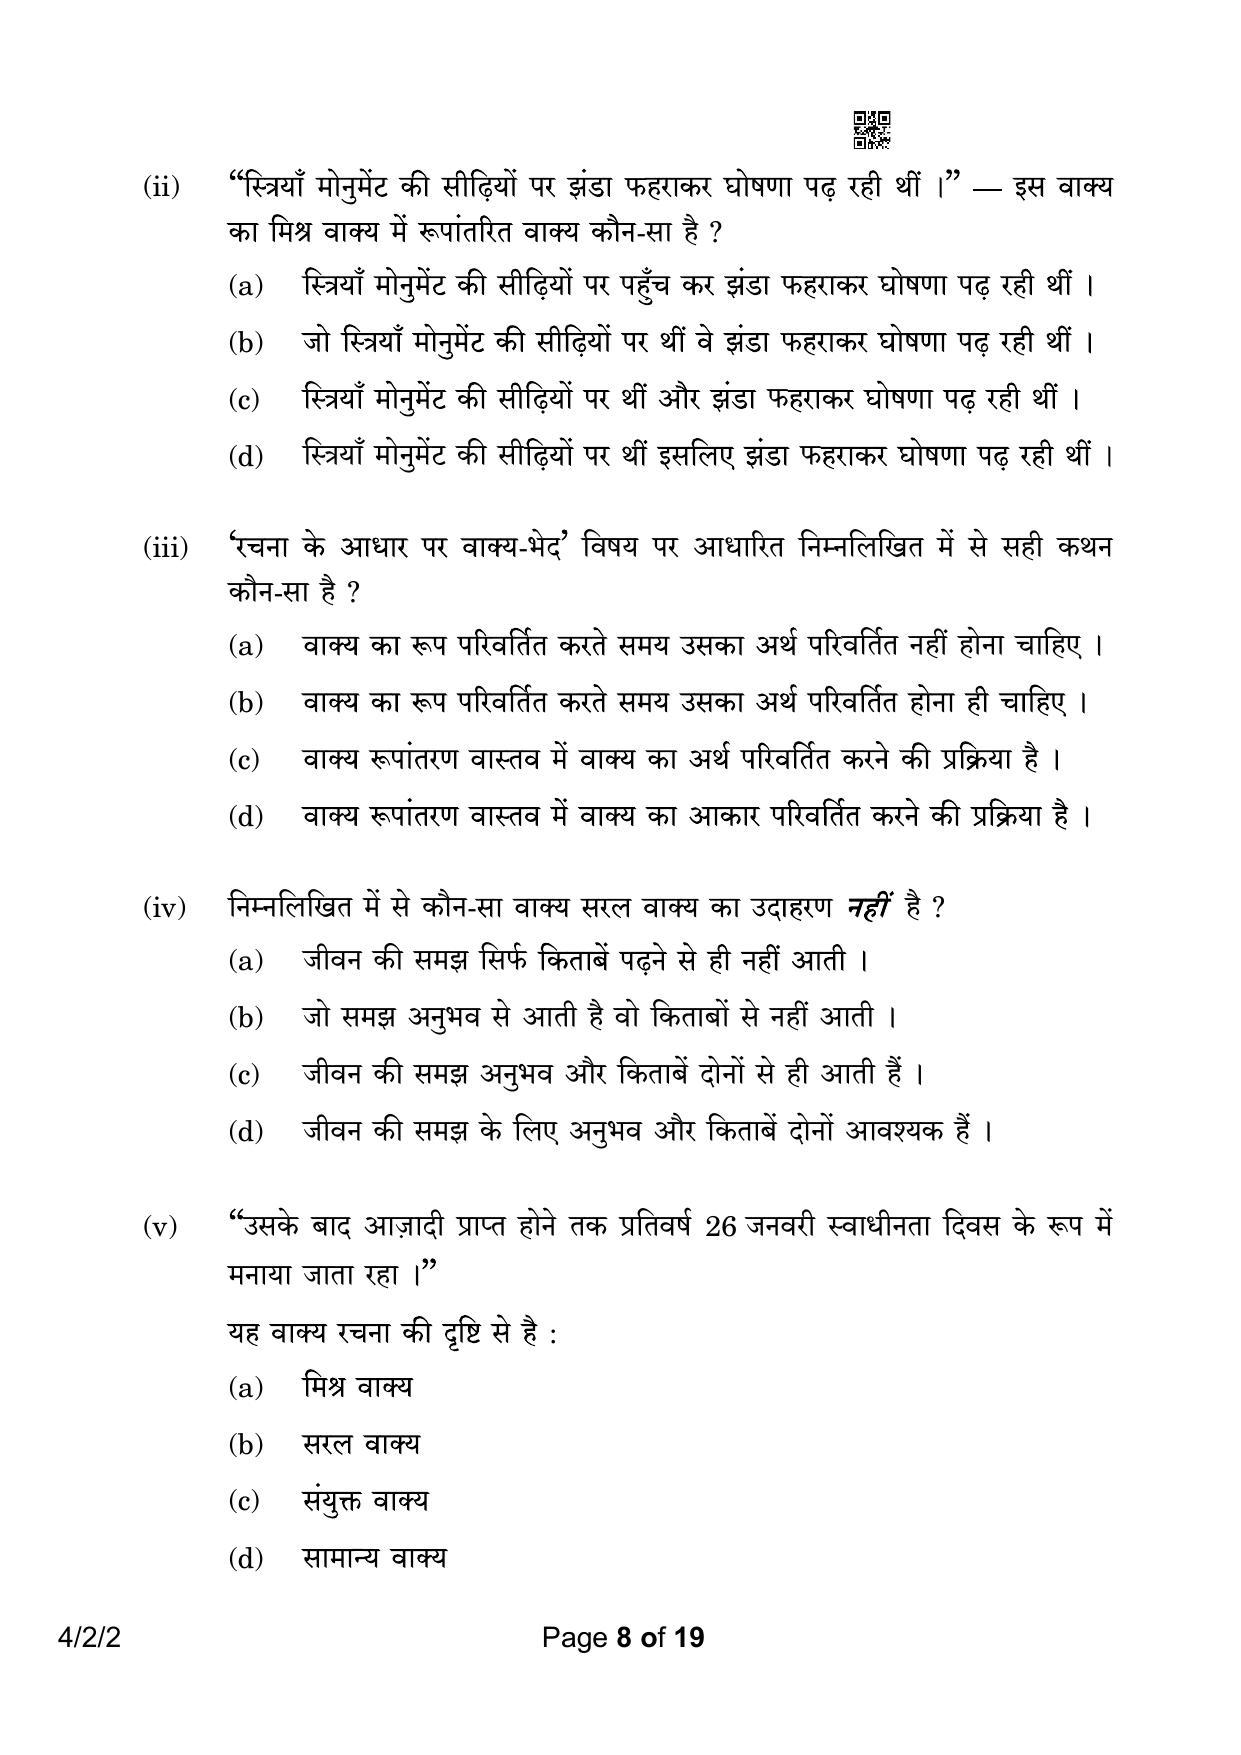 CBSE Class 10 4-2-2 Hindi B 2023 Question Paper - Page 8